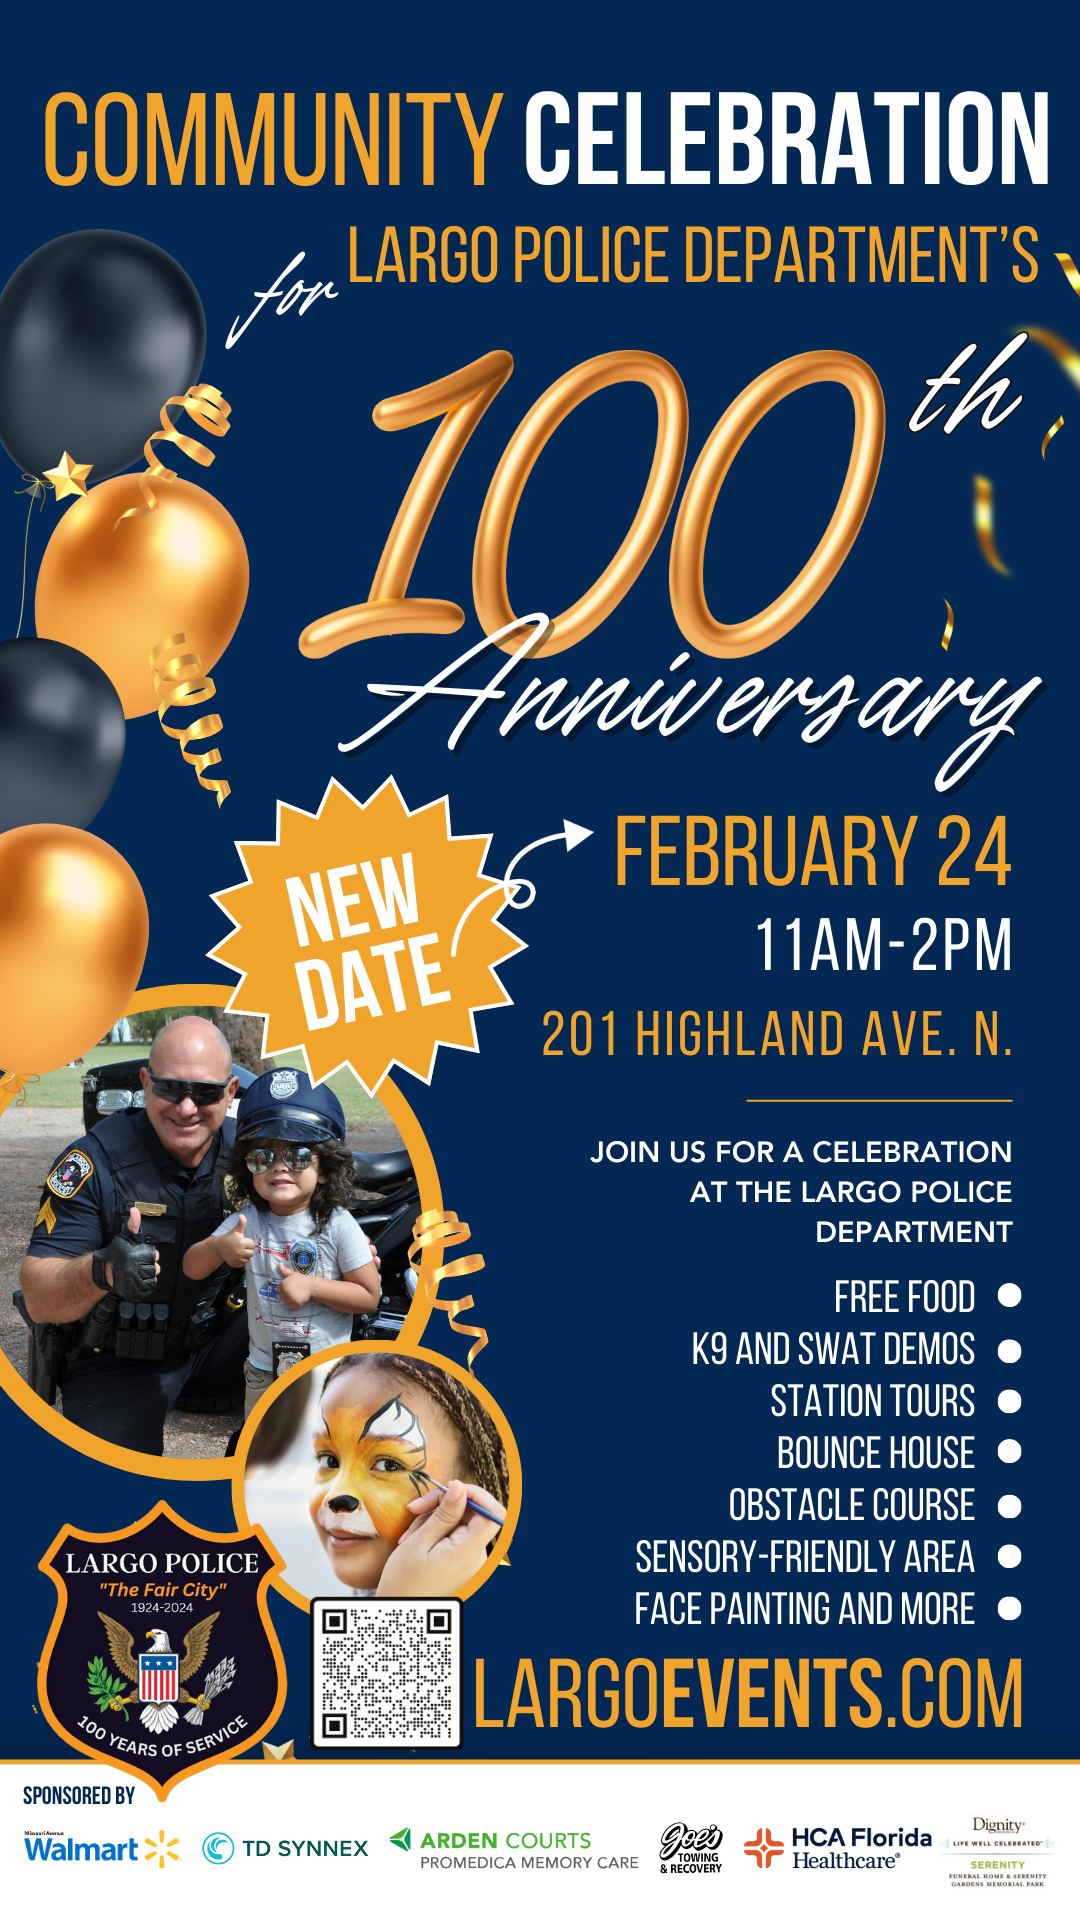 This graphic is for Largo Police Department presents 100th Anniversary Community Celebration